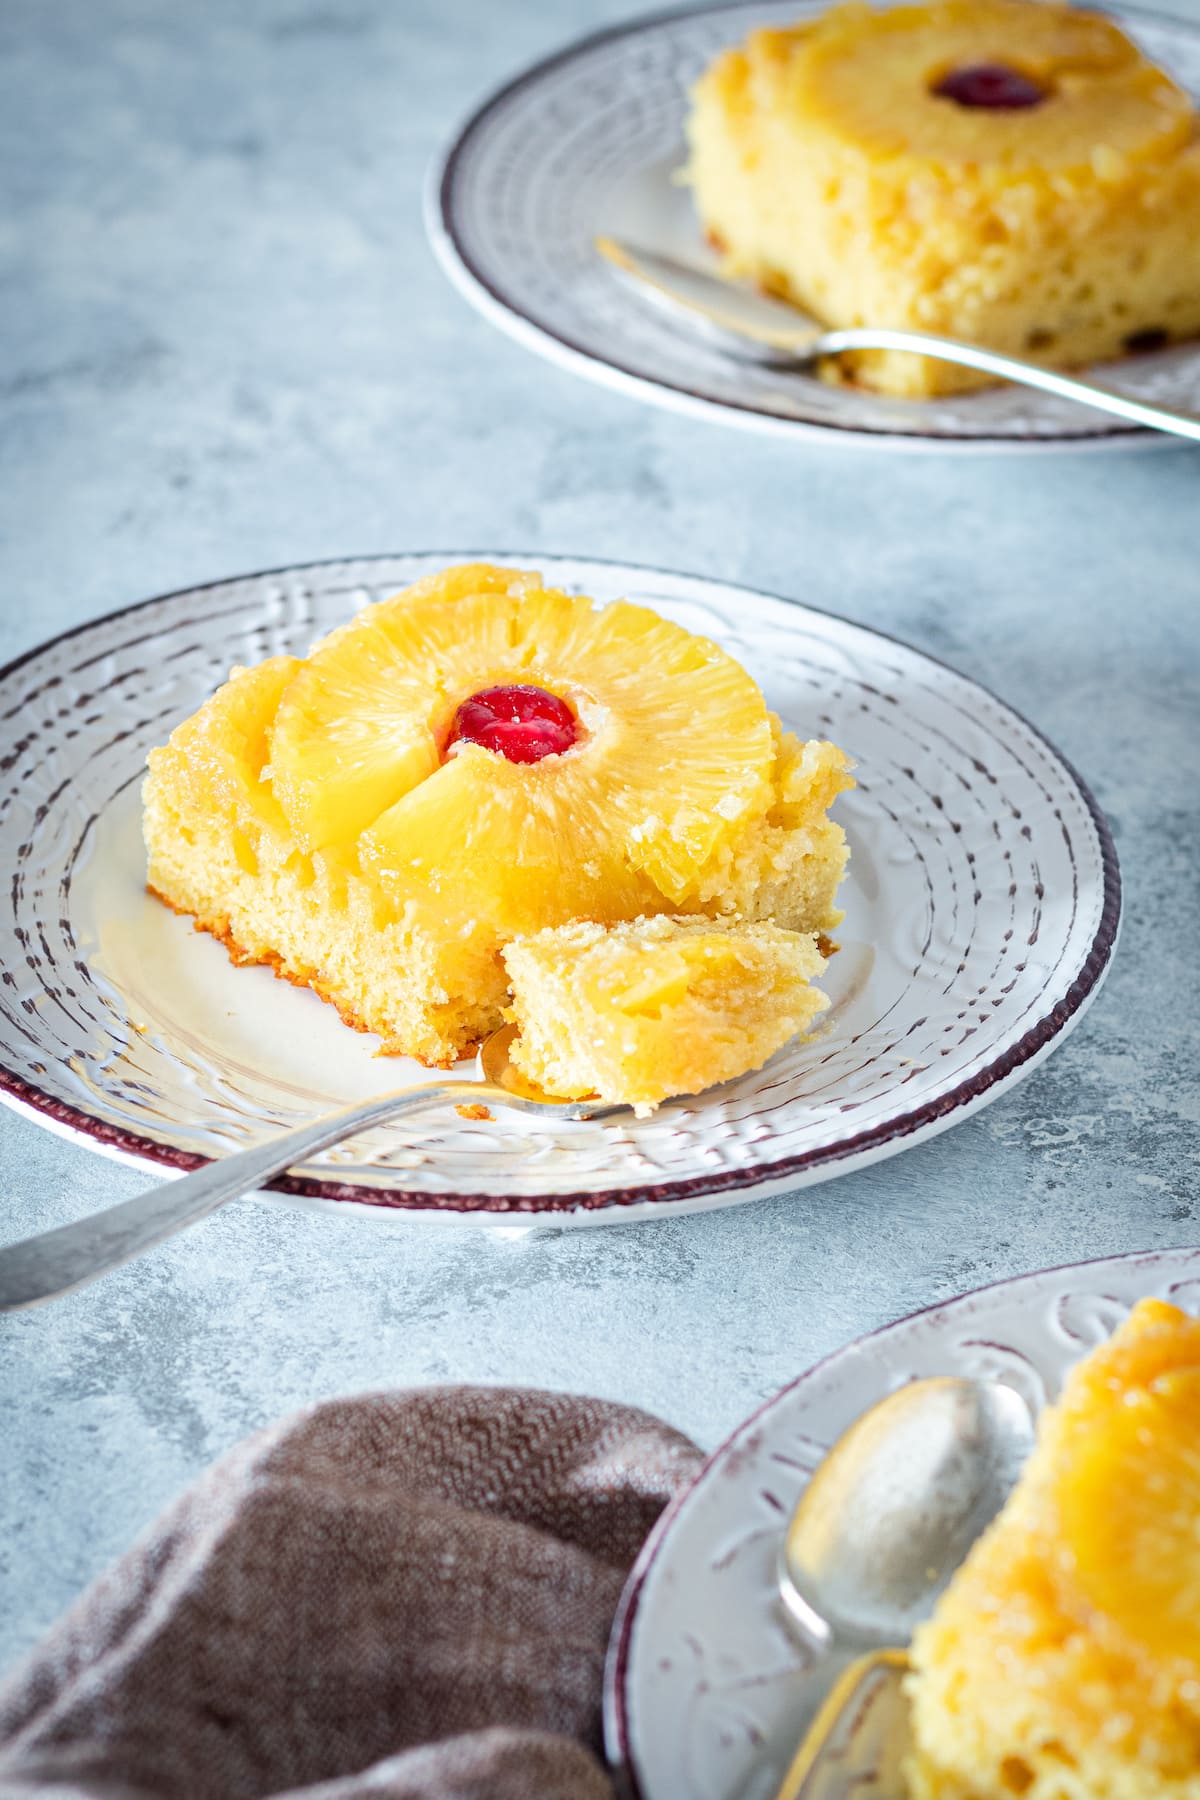 A forkful of pineapple cake.